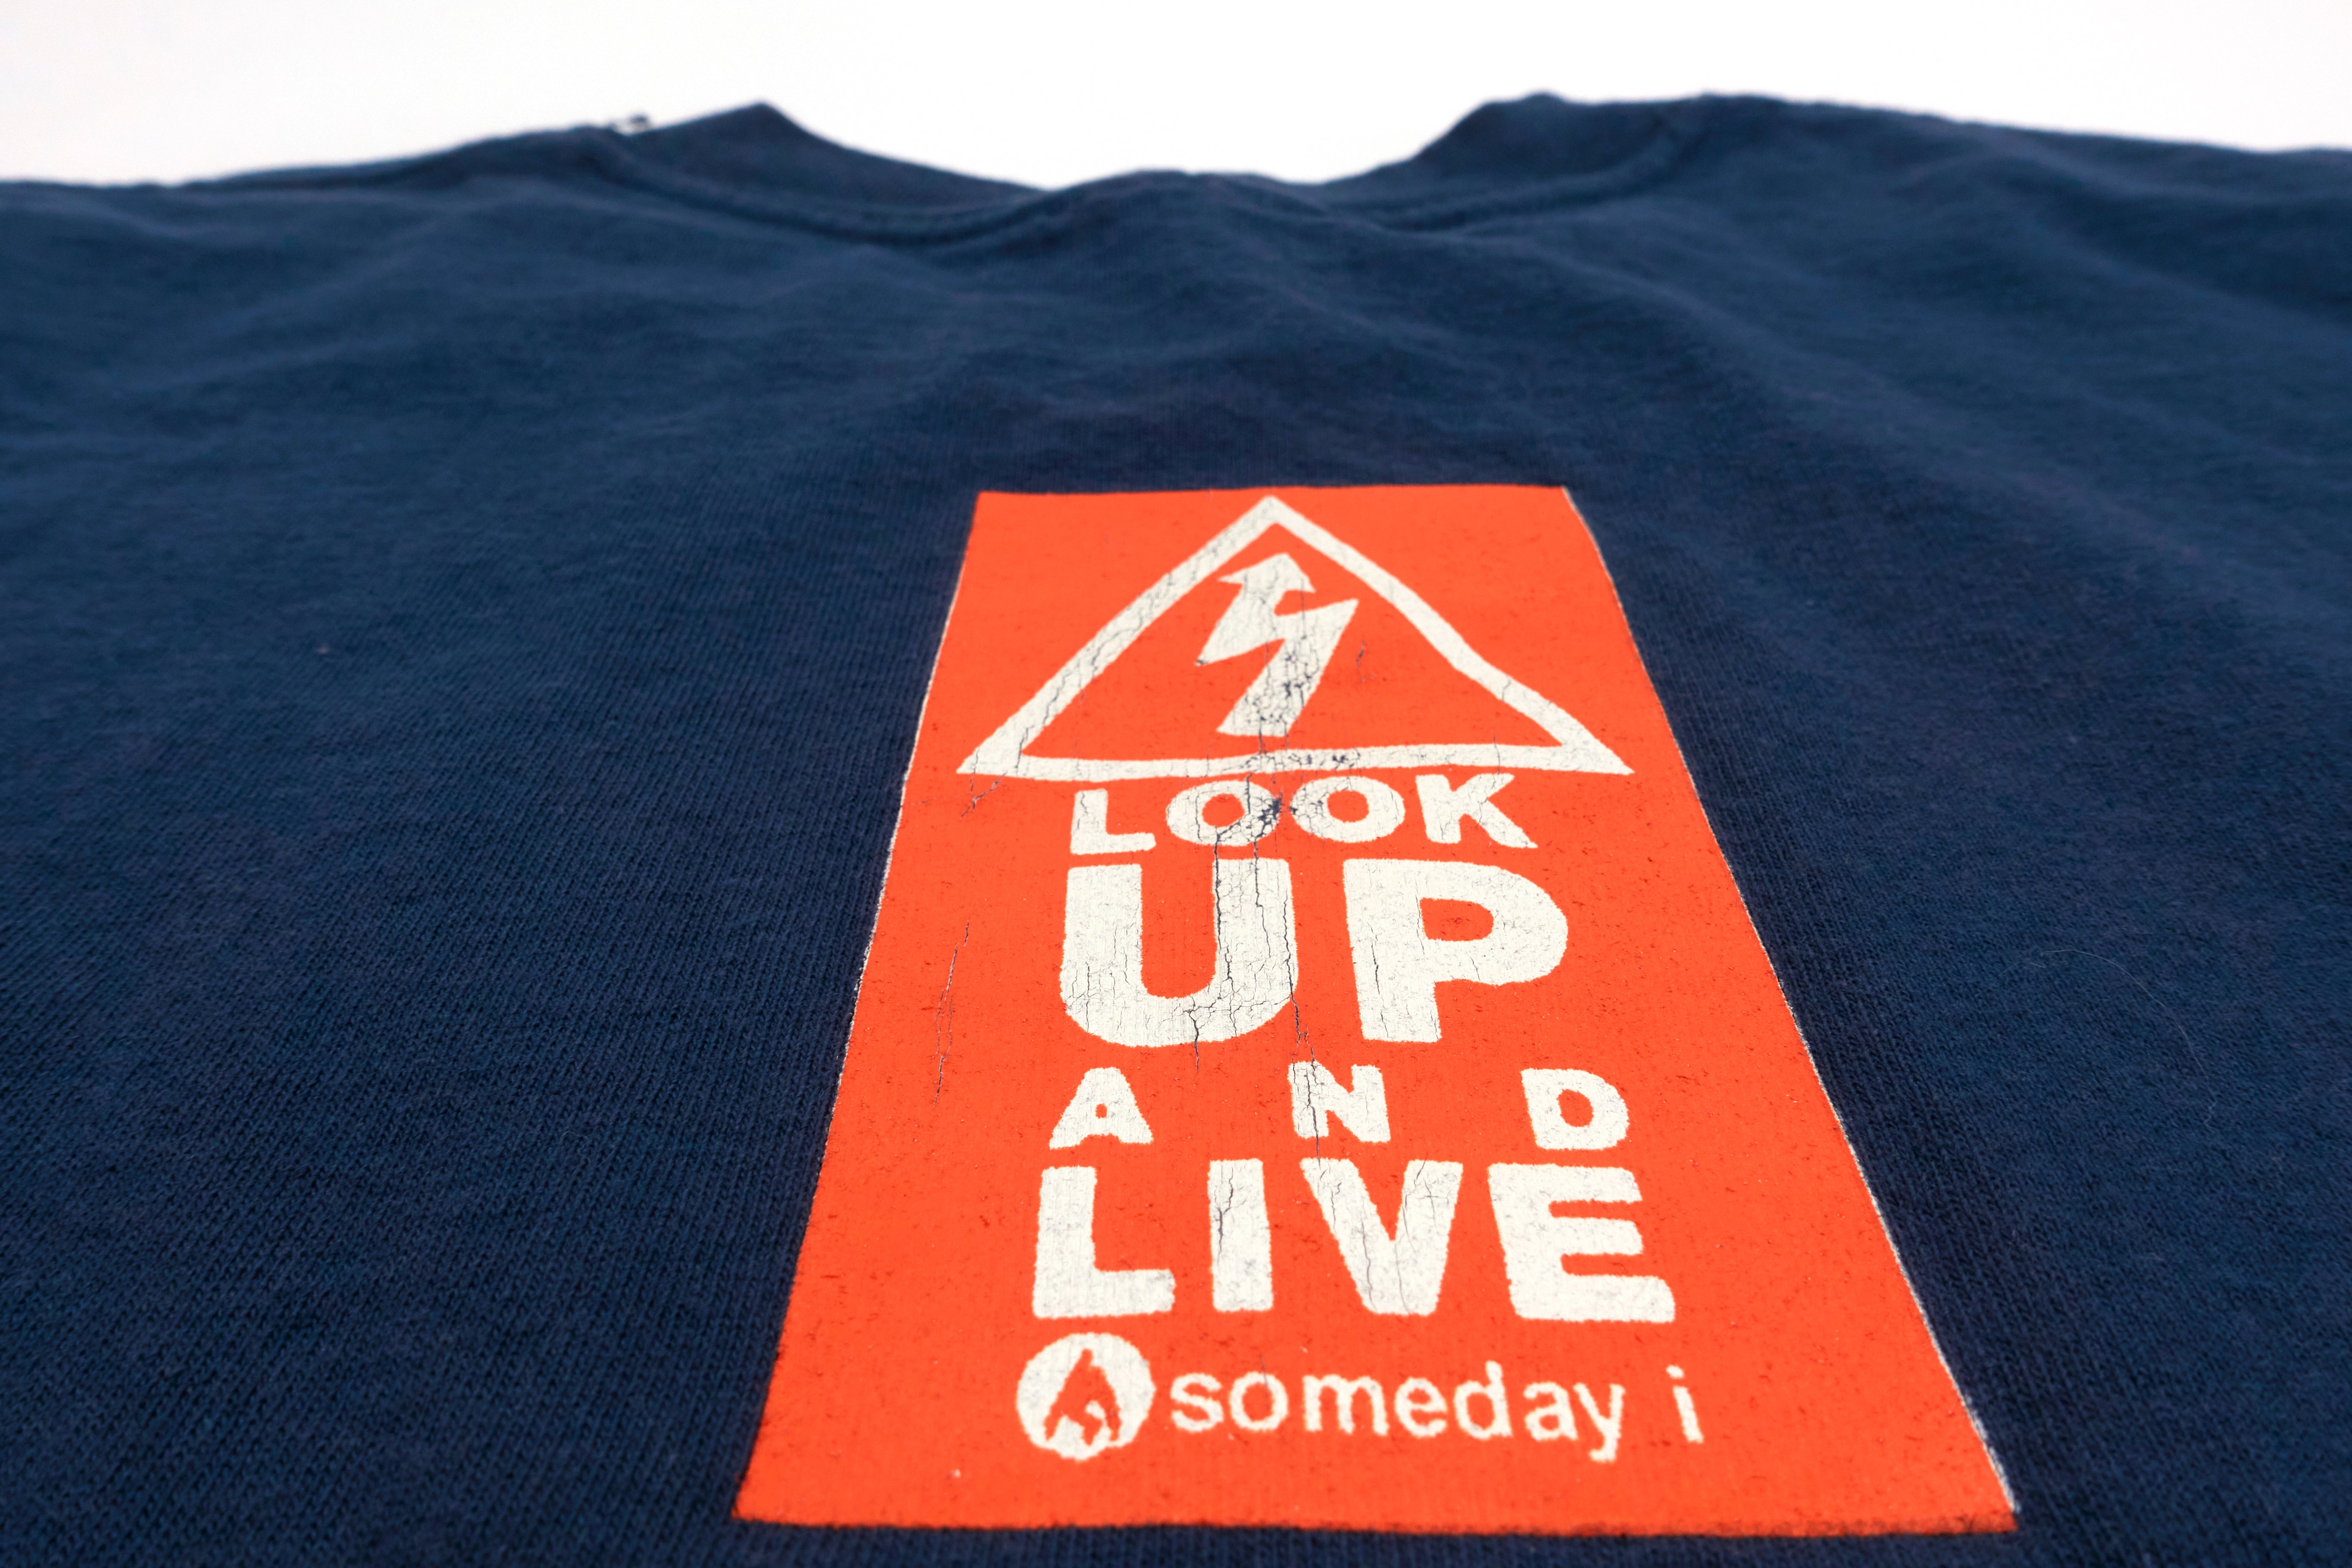 Someday I – Look Up And Live 1999 Tour Shirt Size XL